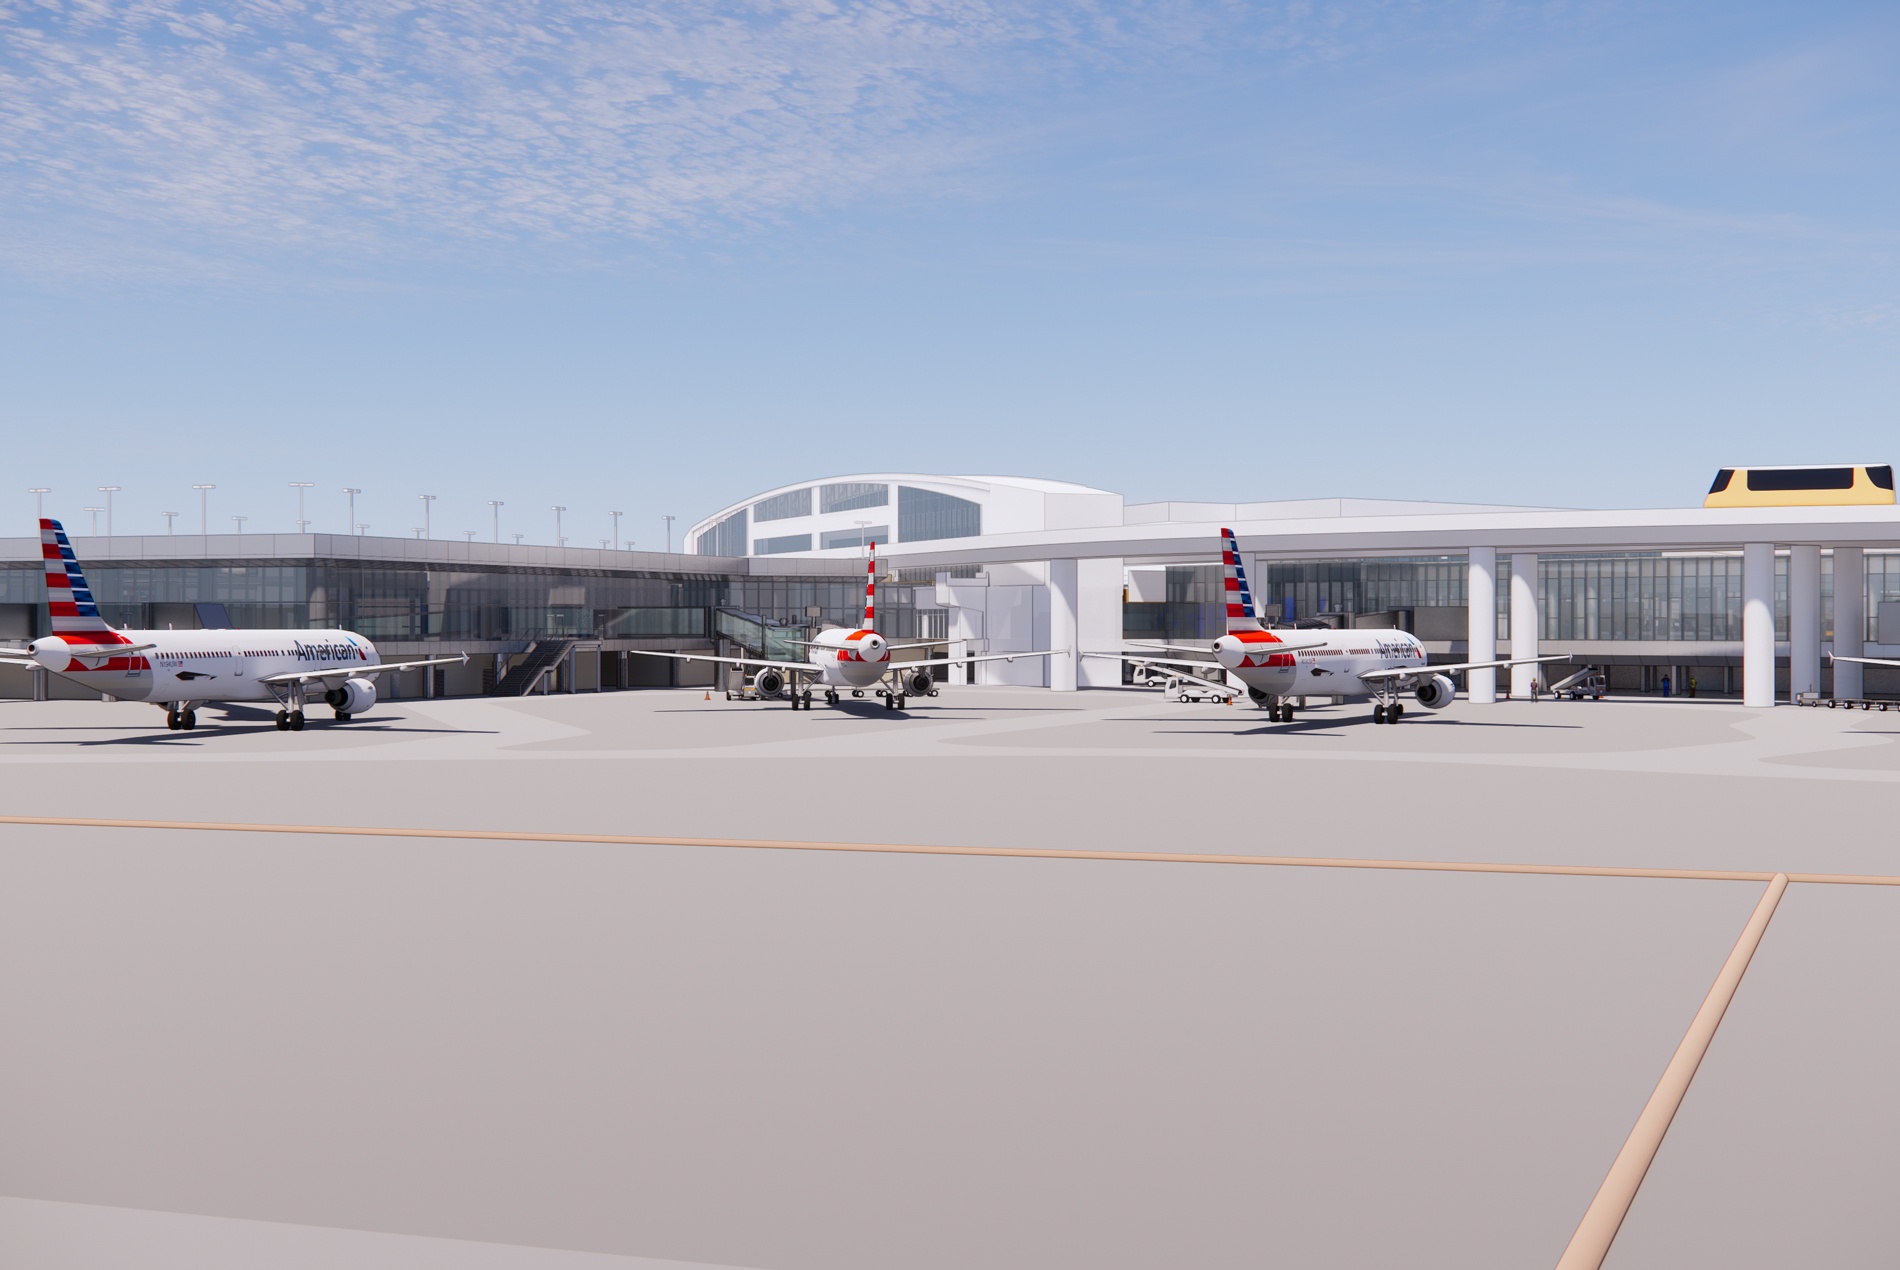 DFW Airport's Future: High-Tech, Efficient and Passenger-Focused - HOK